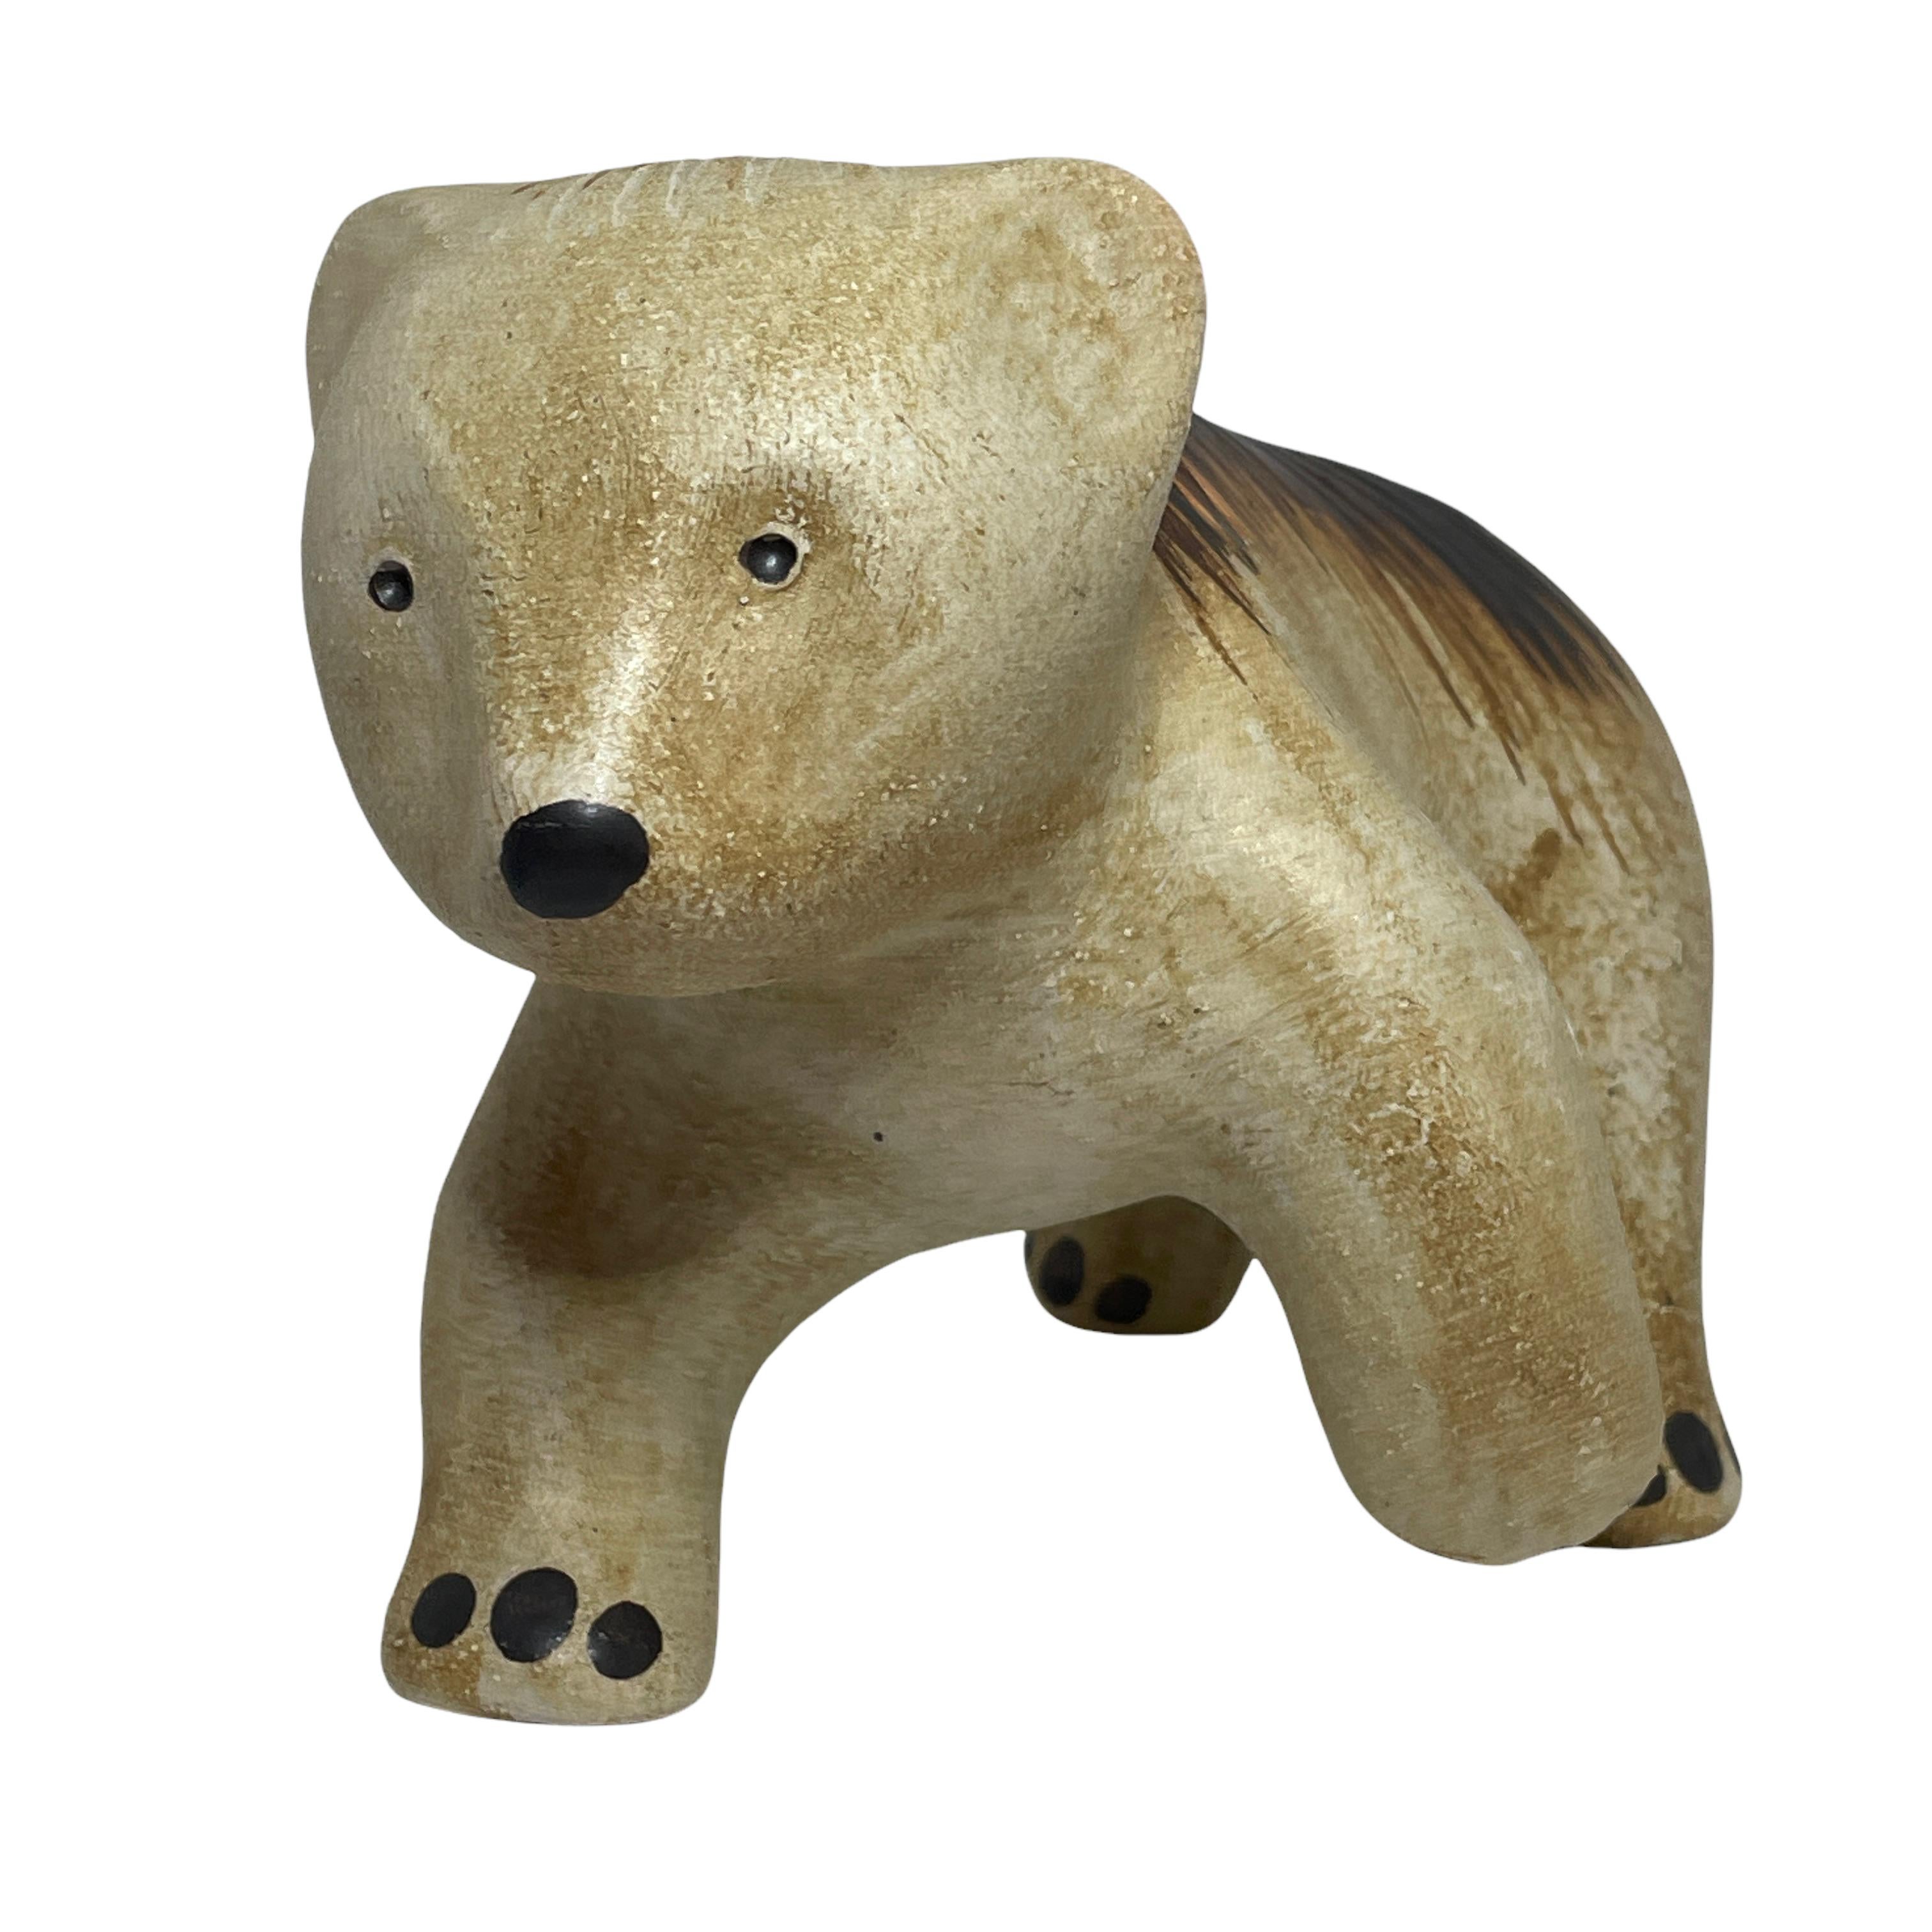 A gorgeous character ceramic figural bear statue - Sgrafo Ceramic. This character statue has been made in the 1970s. Absolutely gorgeous item with signature and still in great condition, without damage.